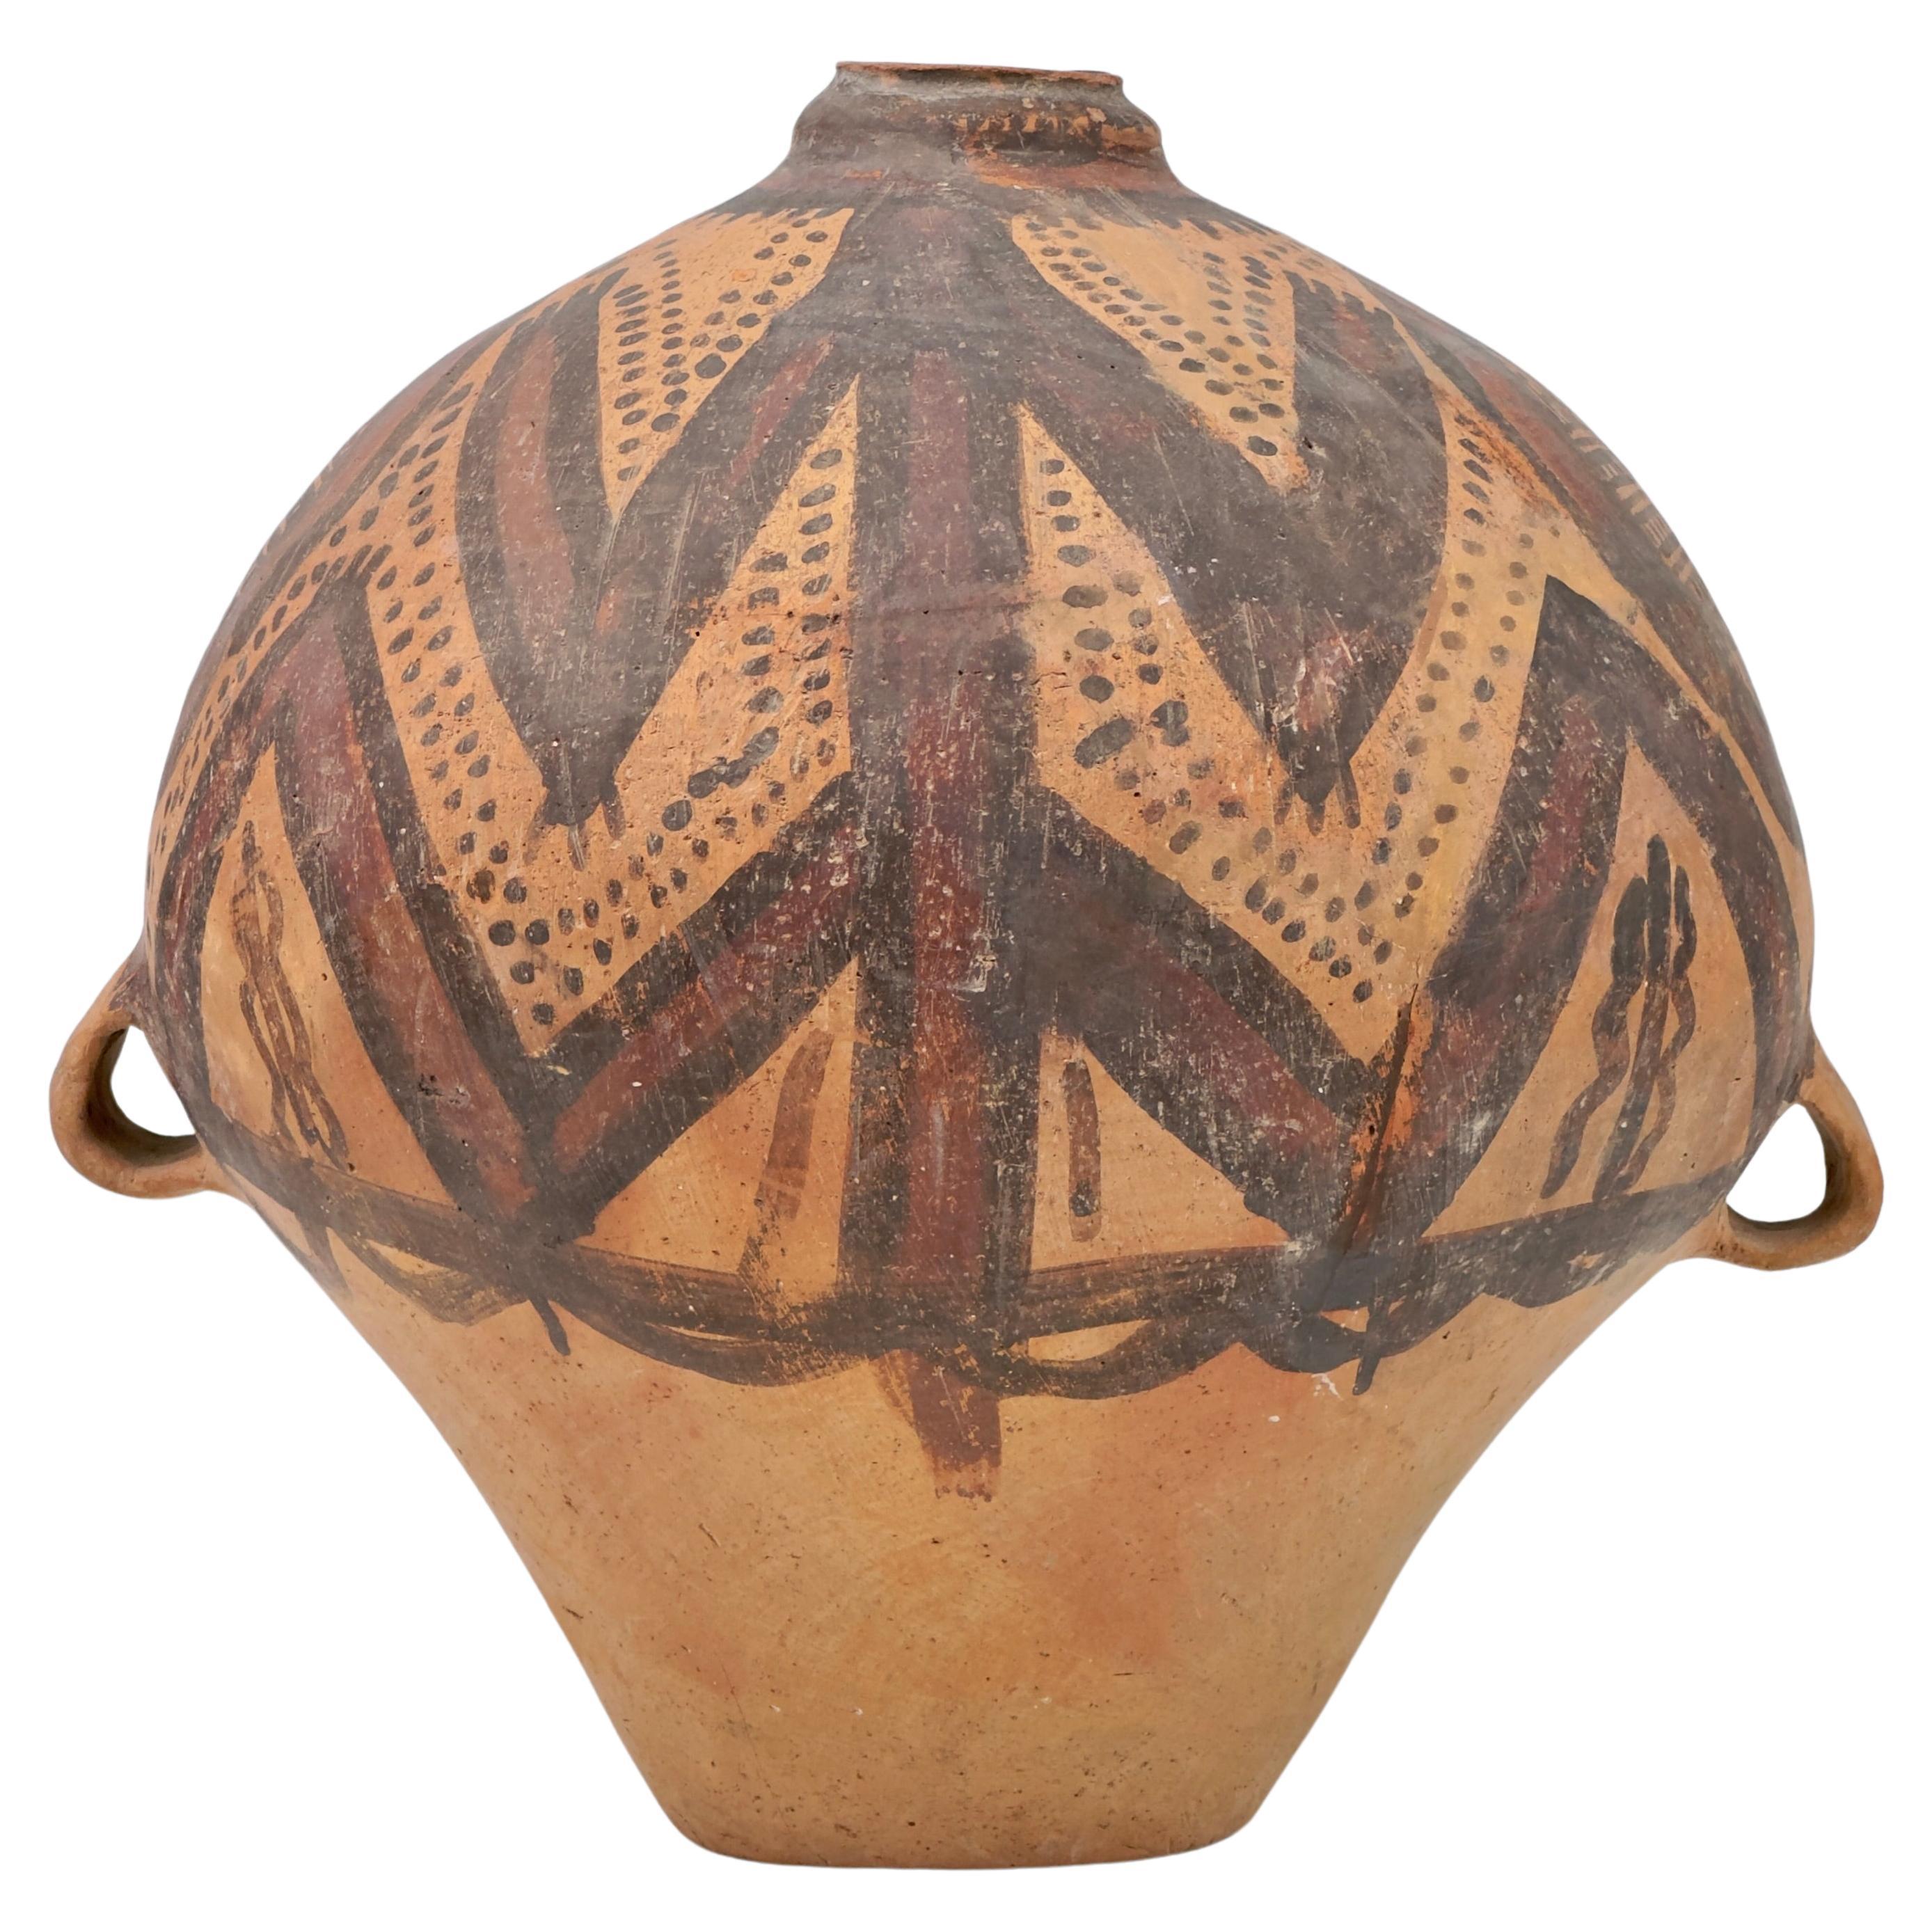 Jar with Painted Decoration of "Frog" Pattern, Neolithic Period